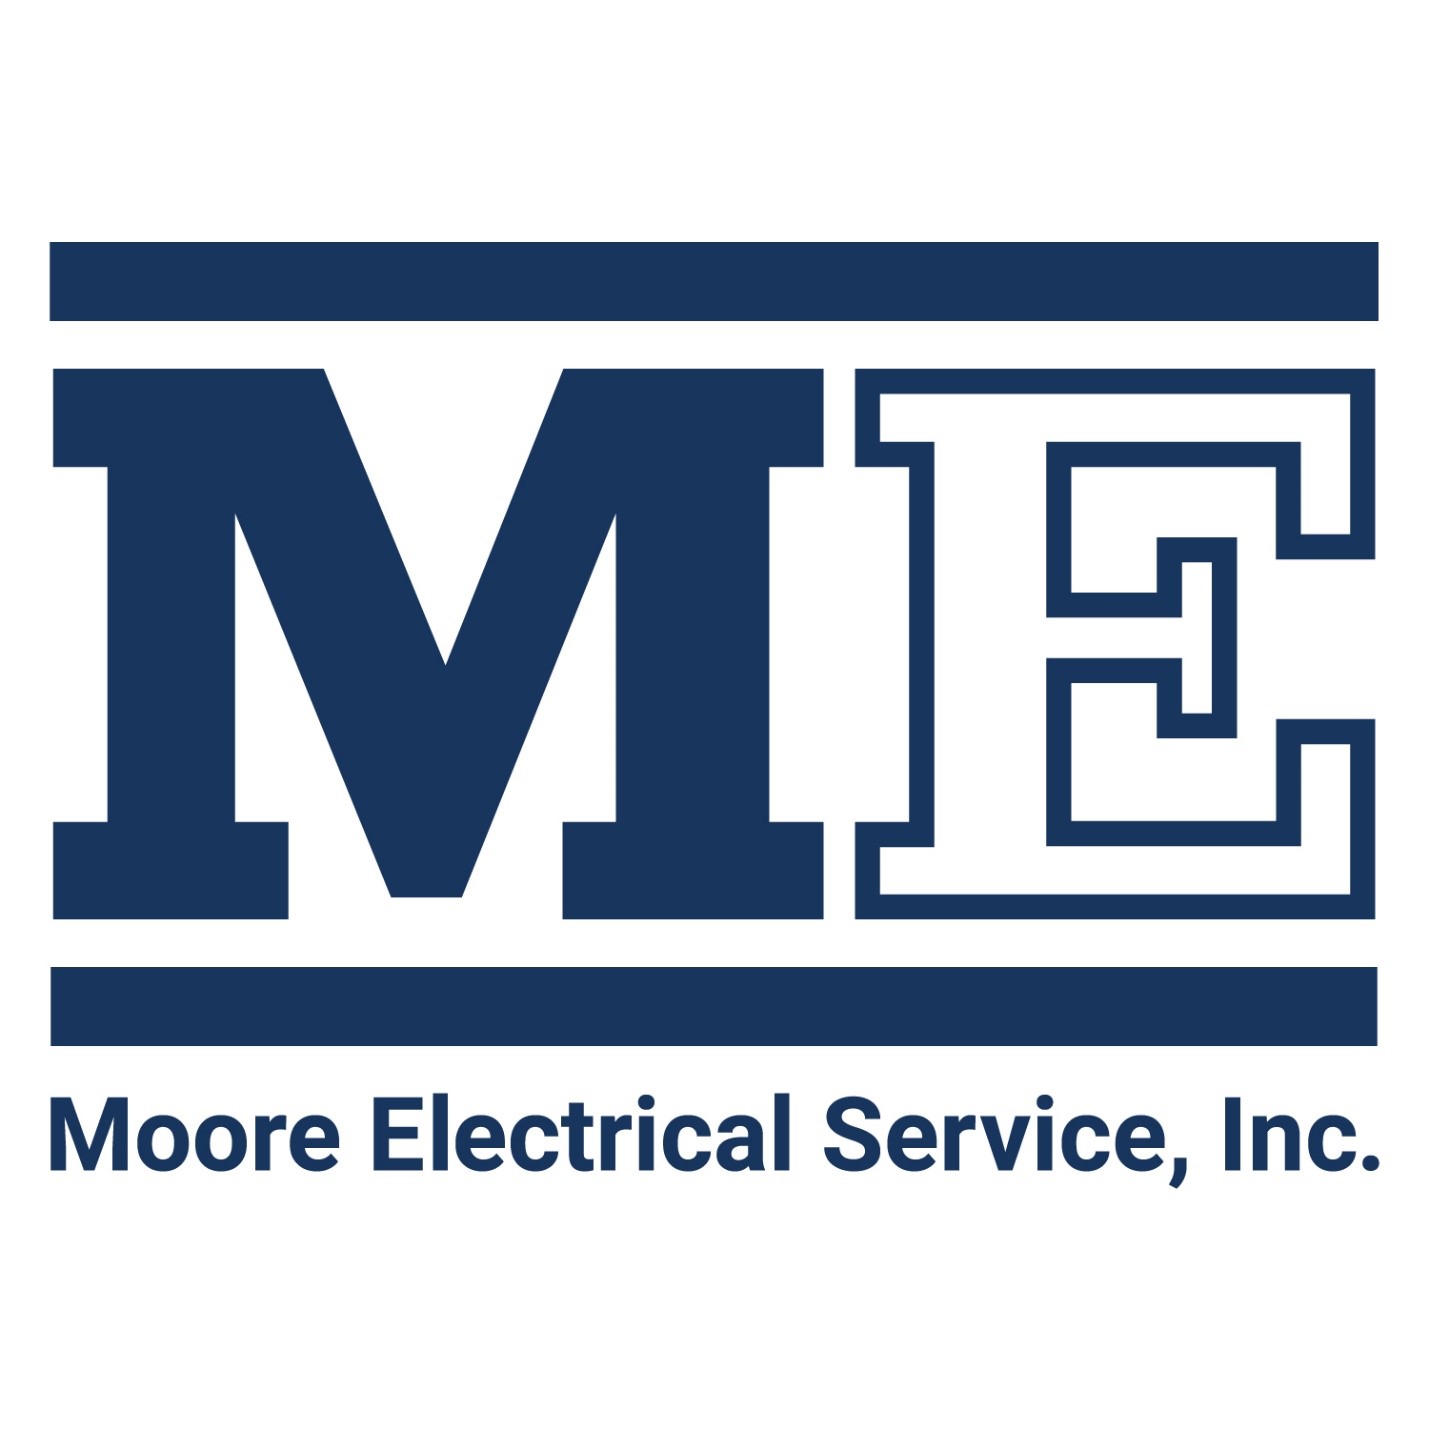 Moore Electrical Services, Inc